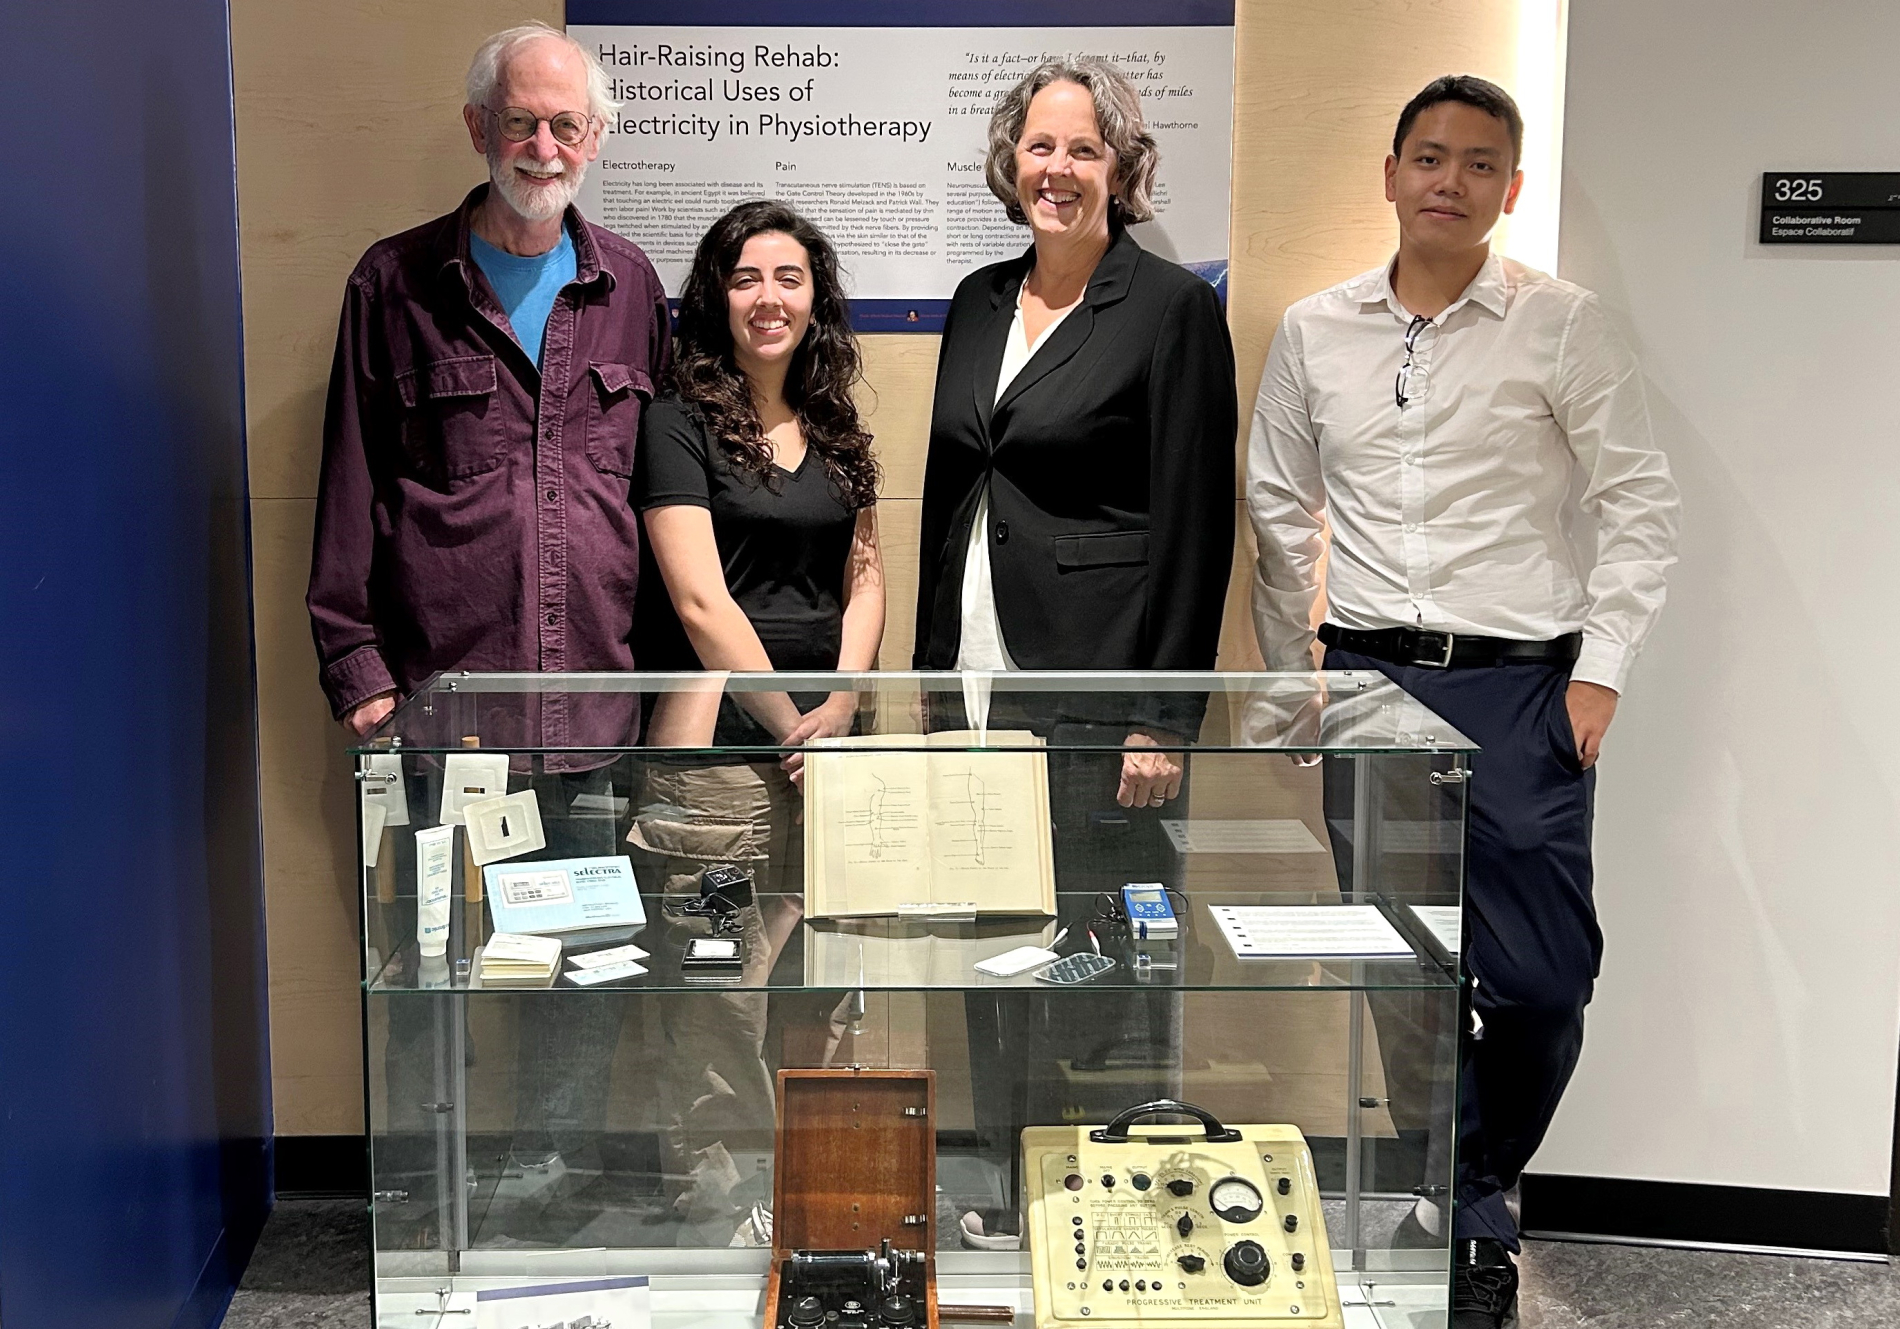 Dr Rick Fraser, Nadia Bichri, Sarah Marshall and Daniel Lee, smiling and standing behind display case of antique equipment